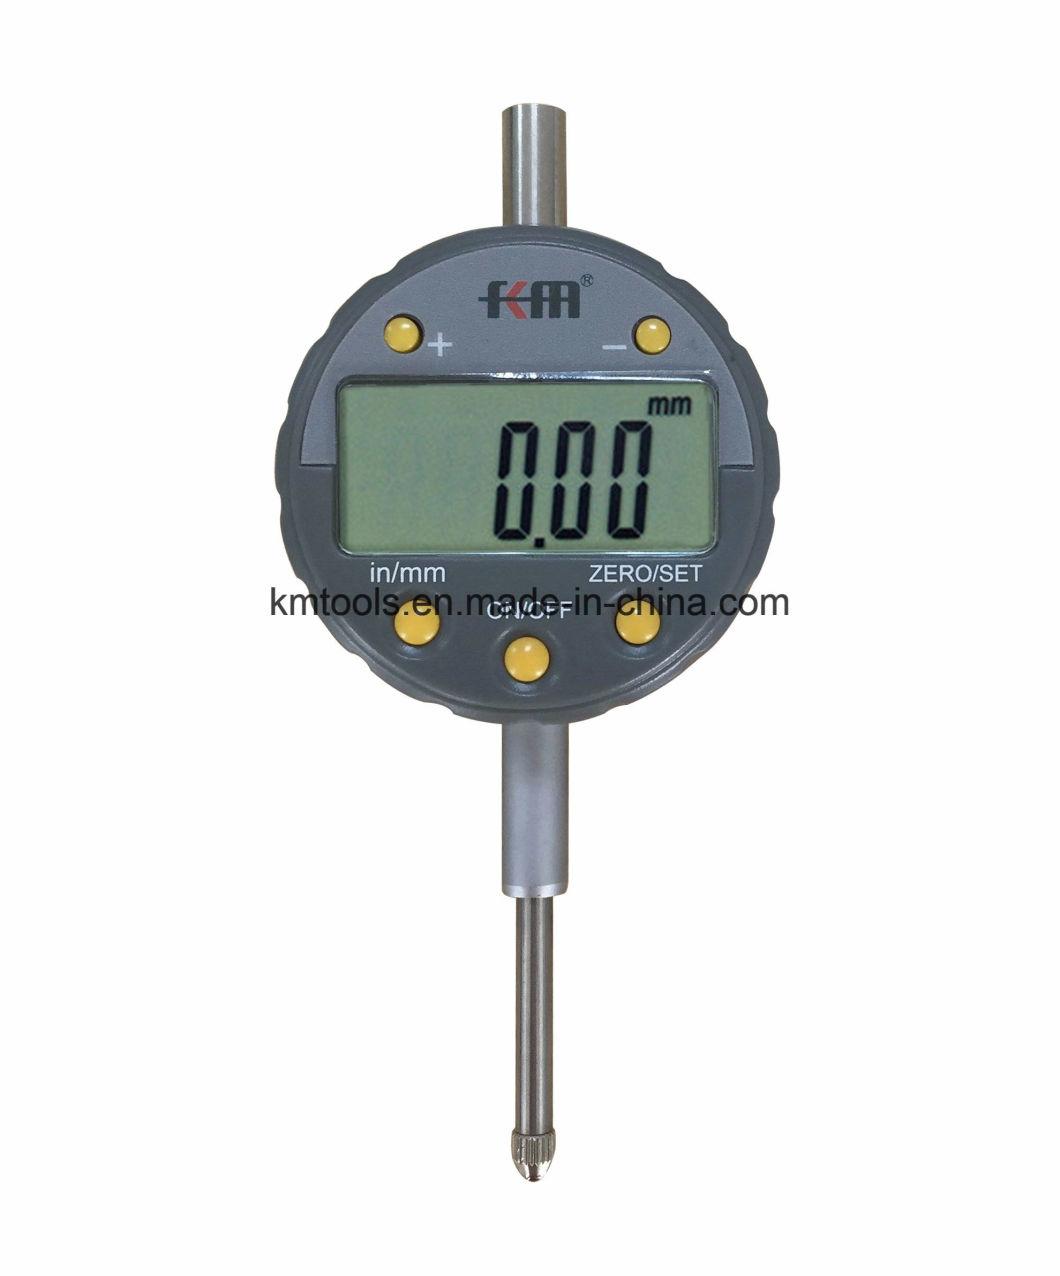 0-25.4mm/0-1′′ Digital Indicator with 0.01mm/0.0005′′ Resolution Measuring Device